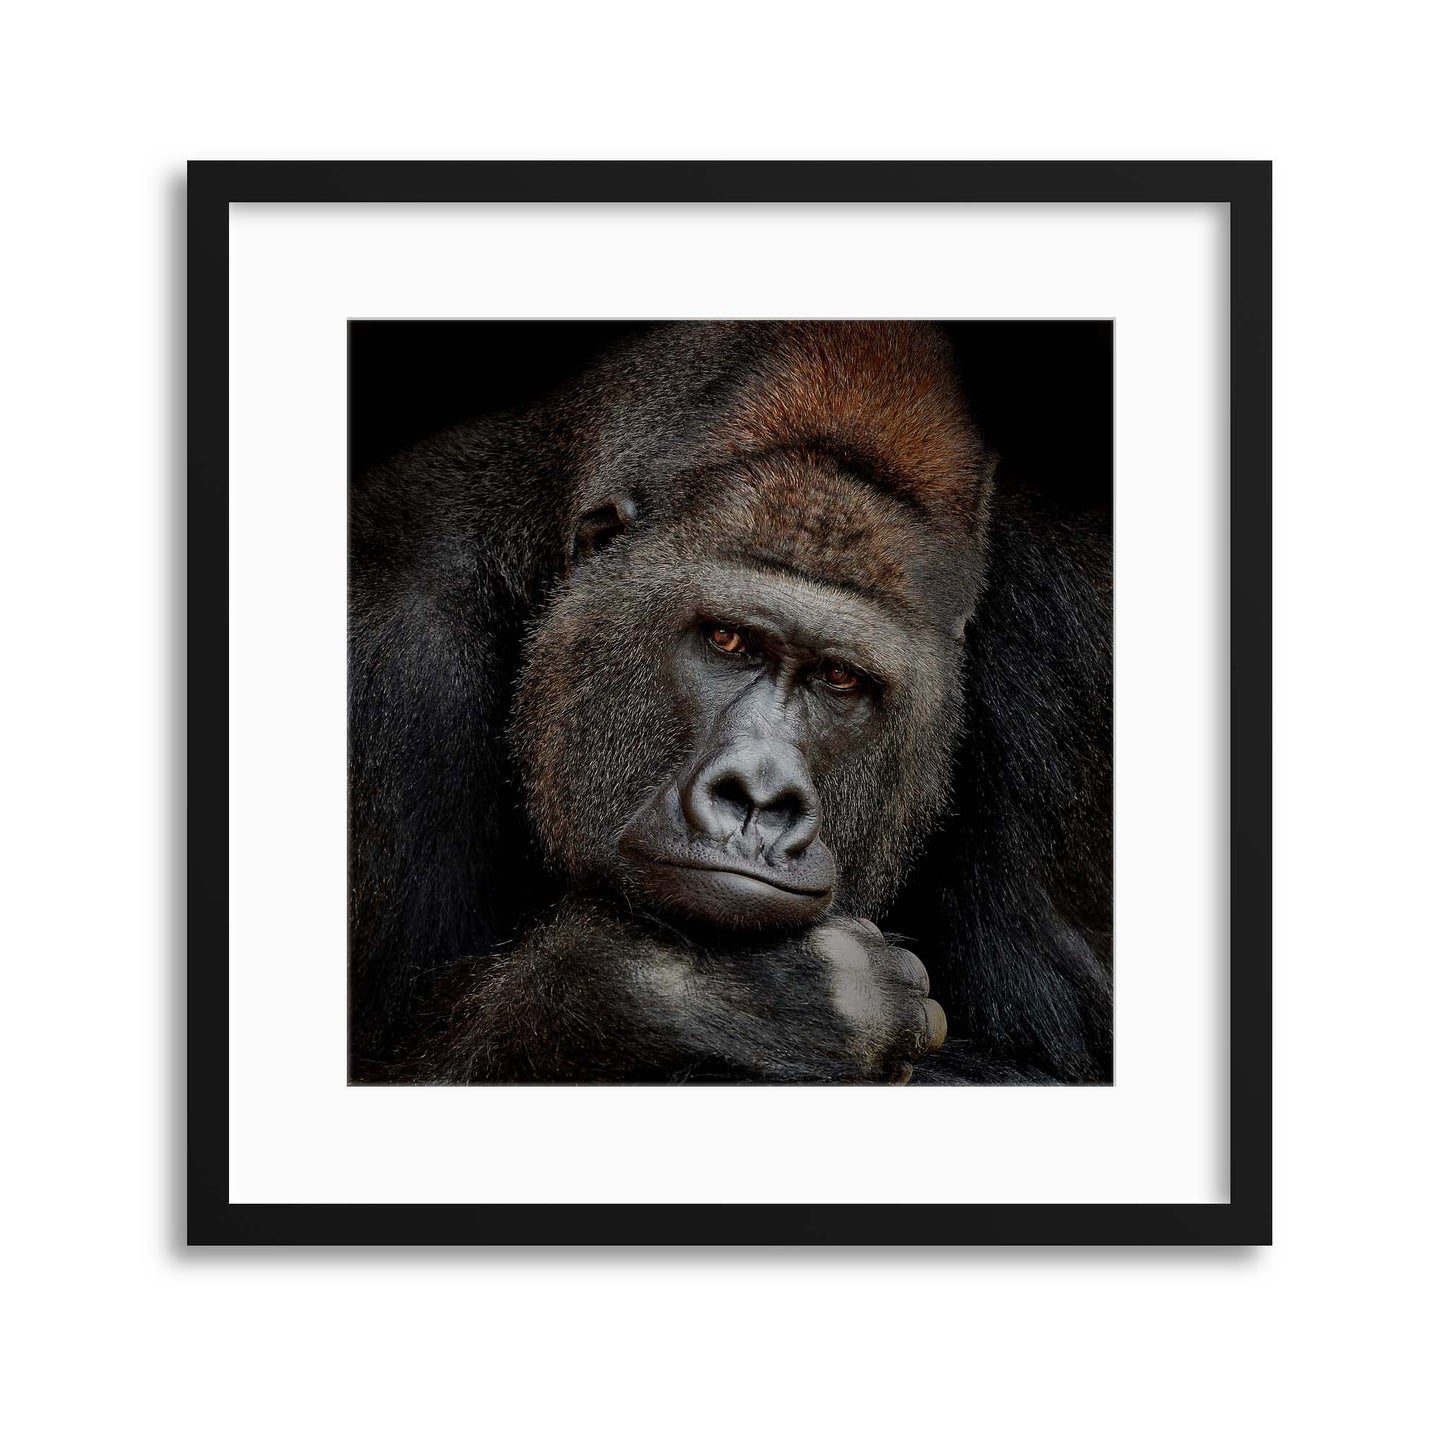 One Moment in Contact by Antje Wenner-Braun Framed Print - USTAD HOME